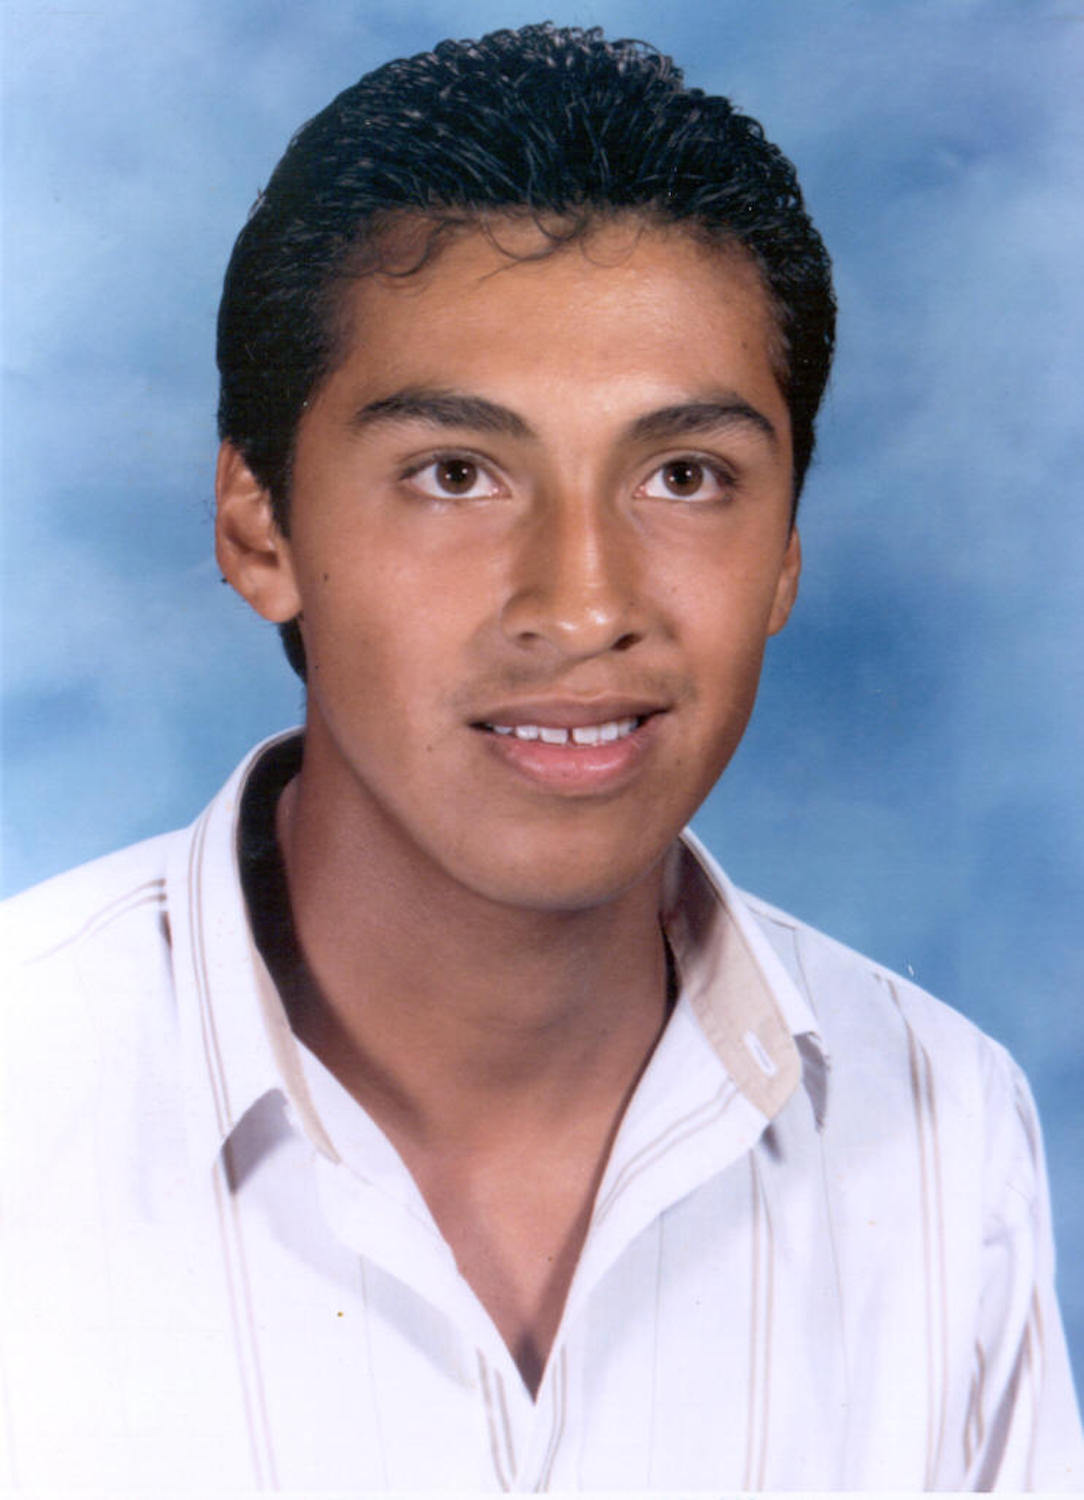 A school photo of Efren Paredes, the author, at 15 years old.